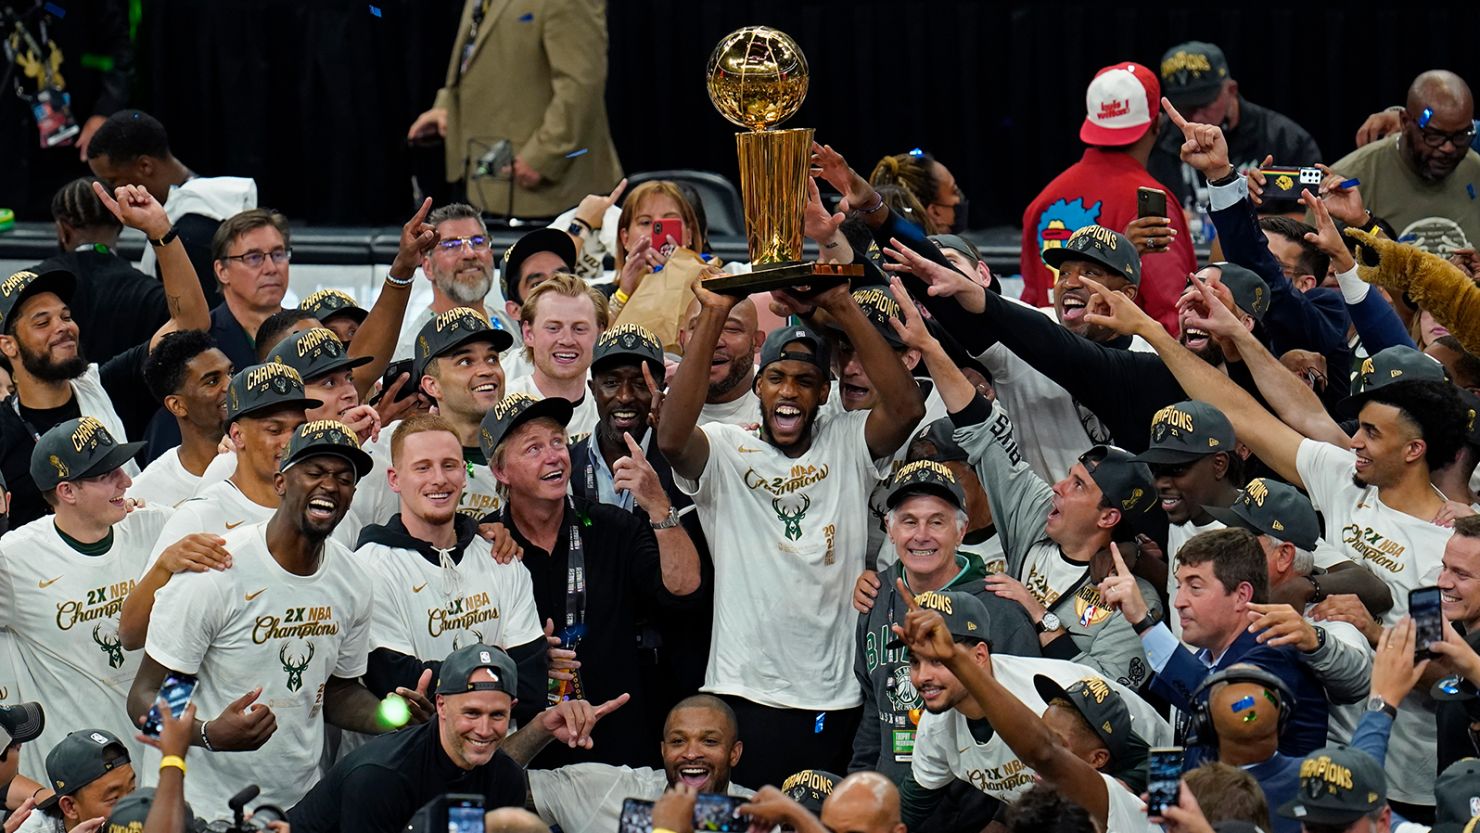 The Bucks celebrate after defeating the Phoenix Suns in Game 6 to win their second NBA title.